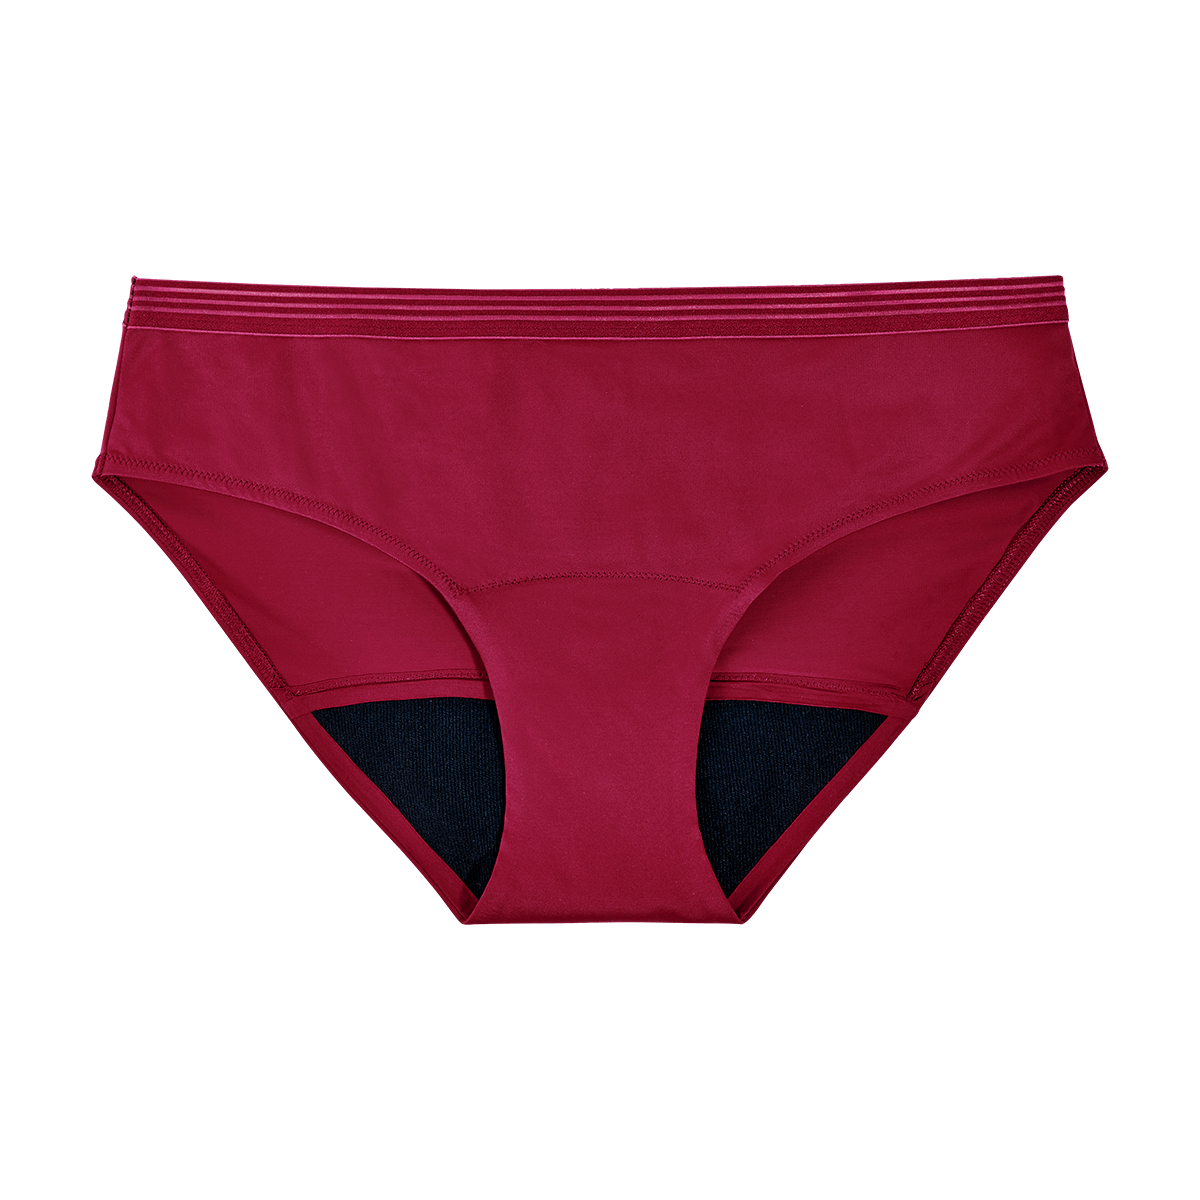 Imagen Inactiva Combo Hipster Negro + Hipster Vinotinto + Bikini Vinotinto + Bikini Negro - Flujo Regular 10